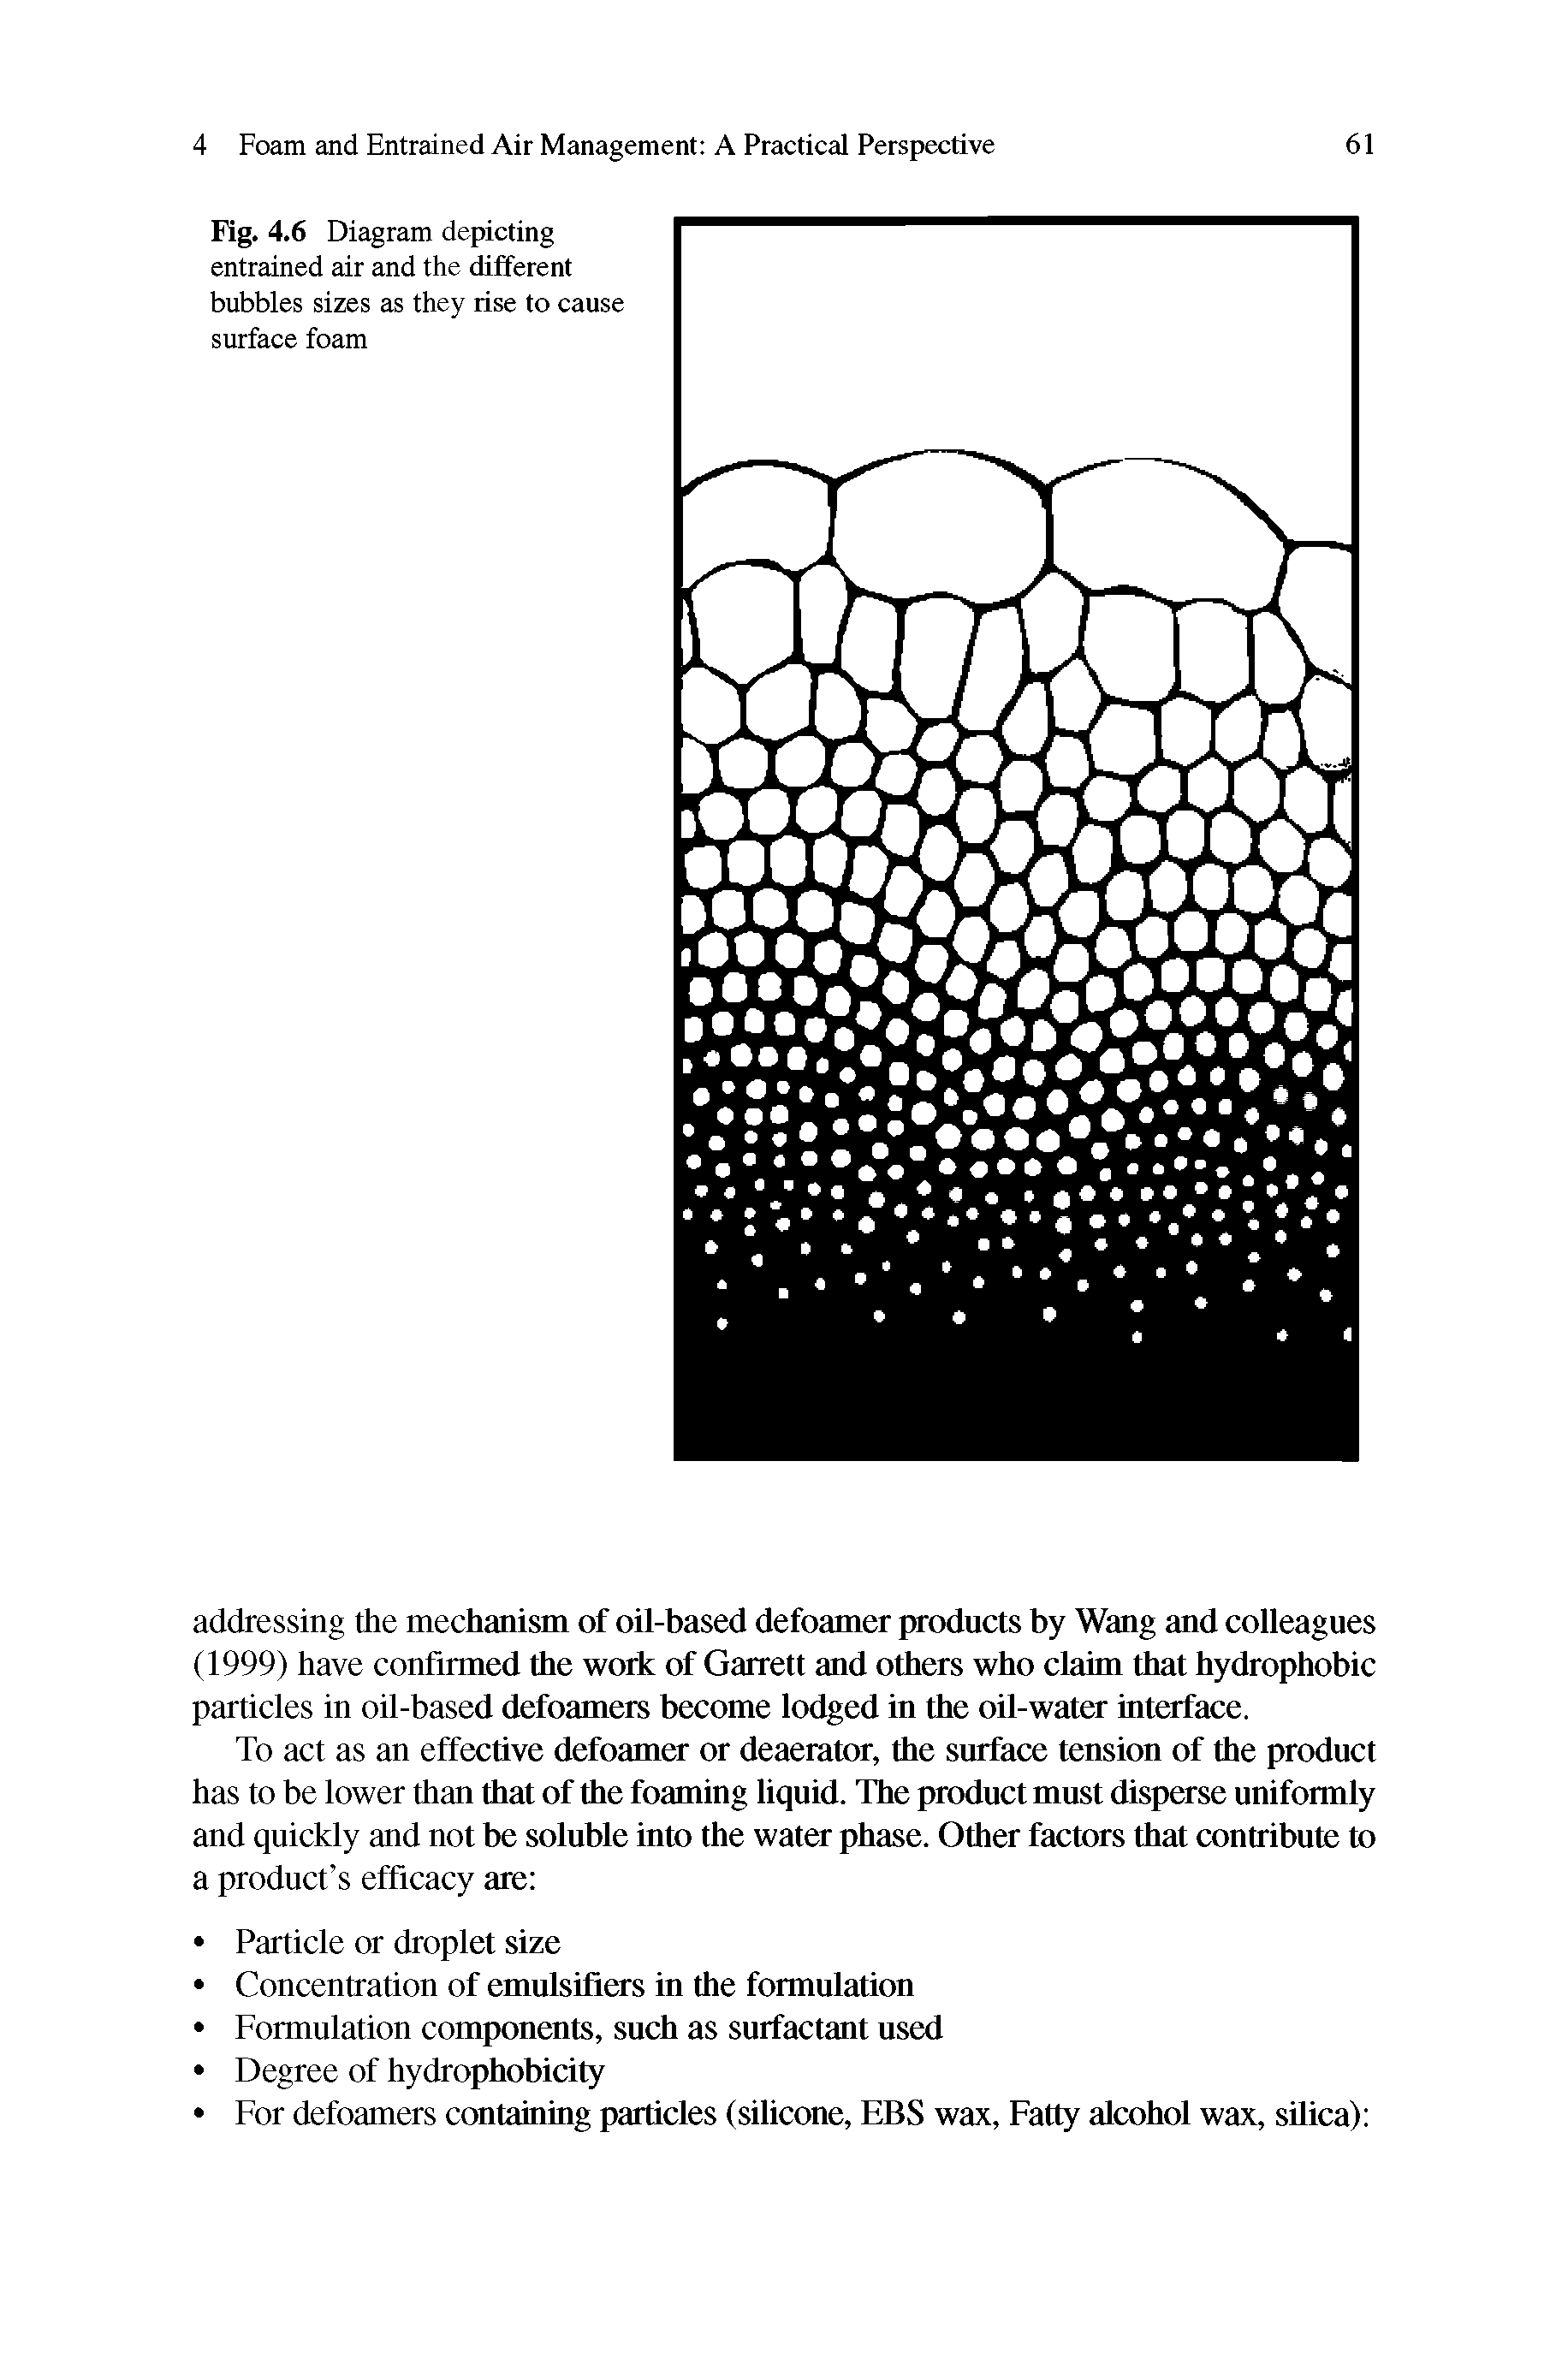 Fig. 4.6 Diagram depicting entrained air and the different bubbles sizes as they rise to cause surface foam...